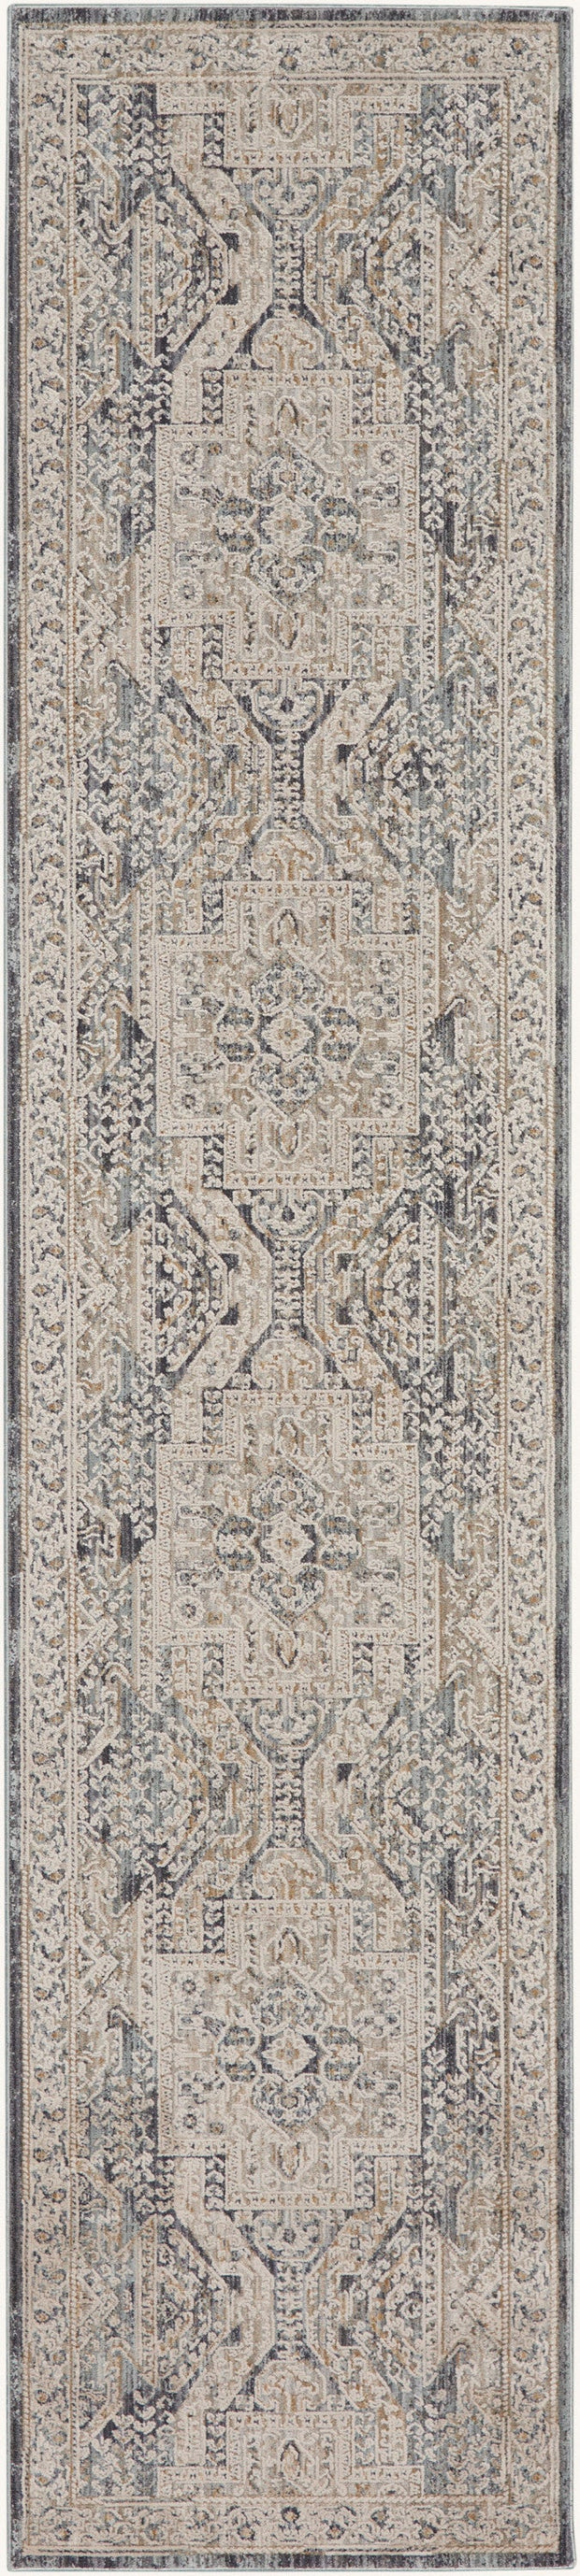 lynx ivory charcoal rug by nourison 99446082619 redo 4